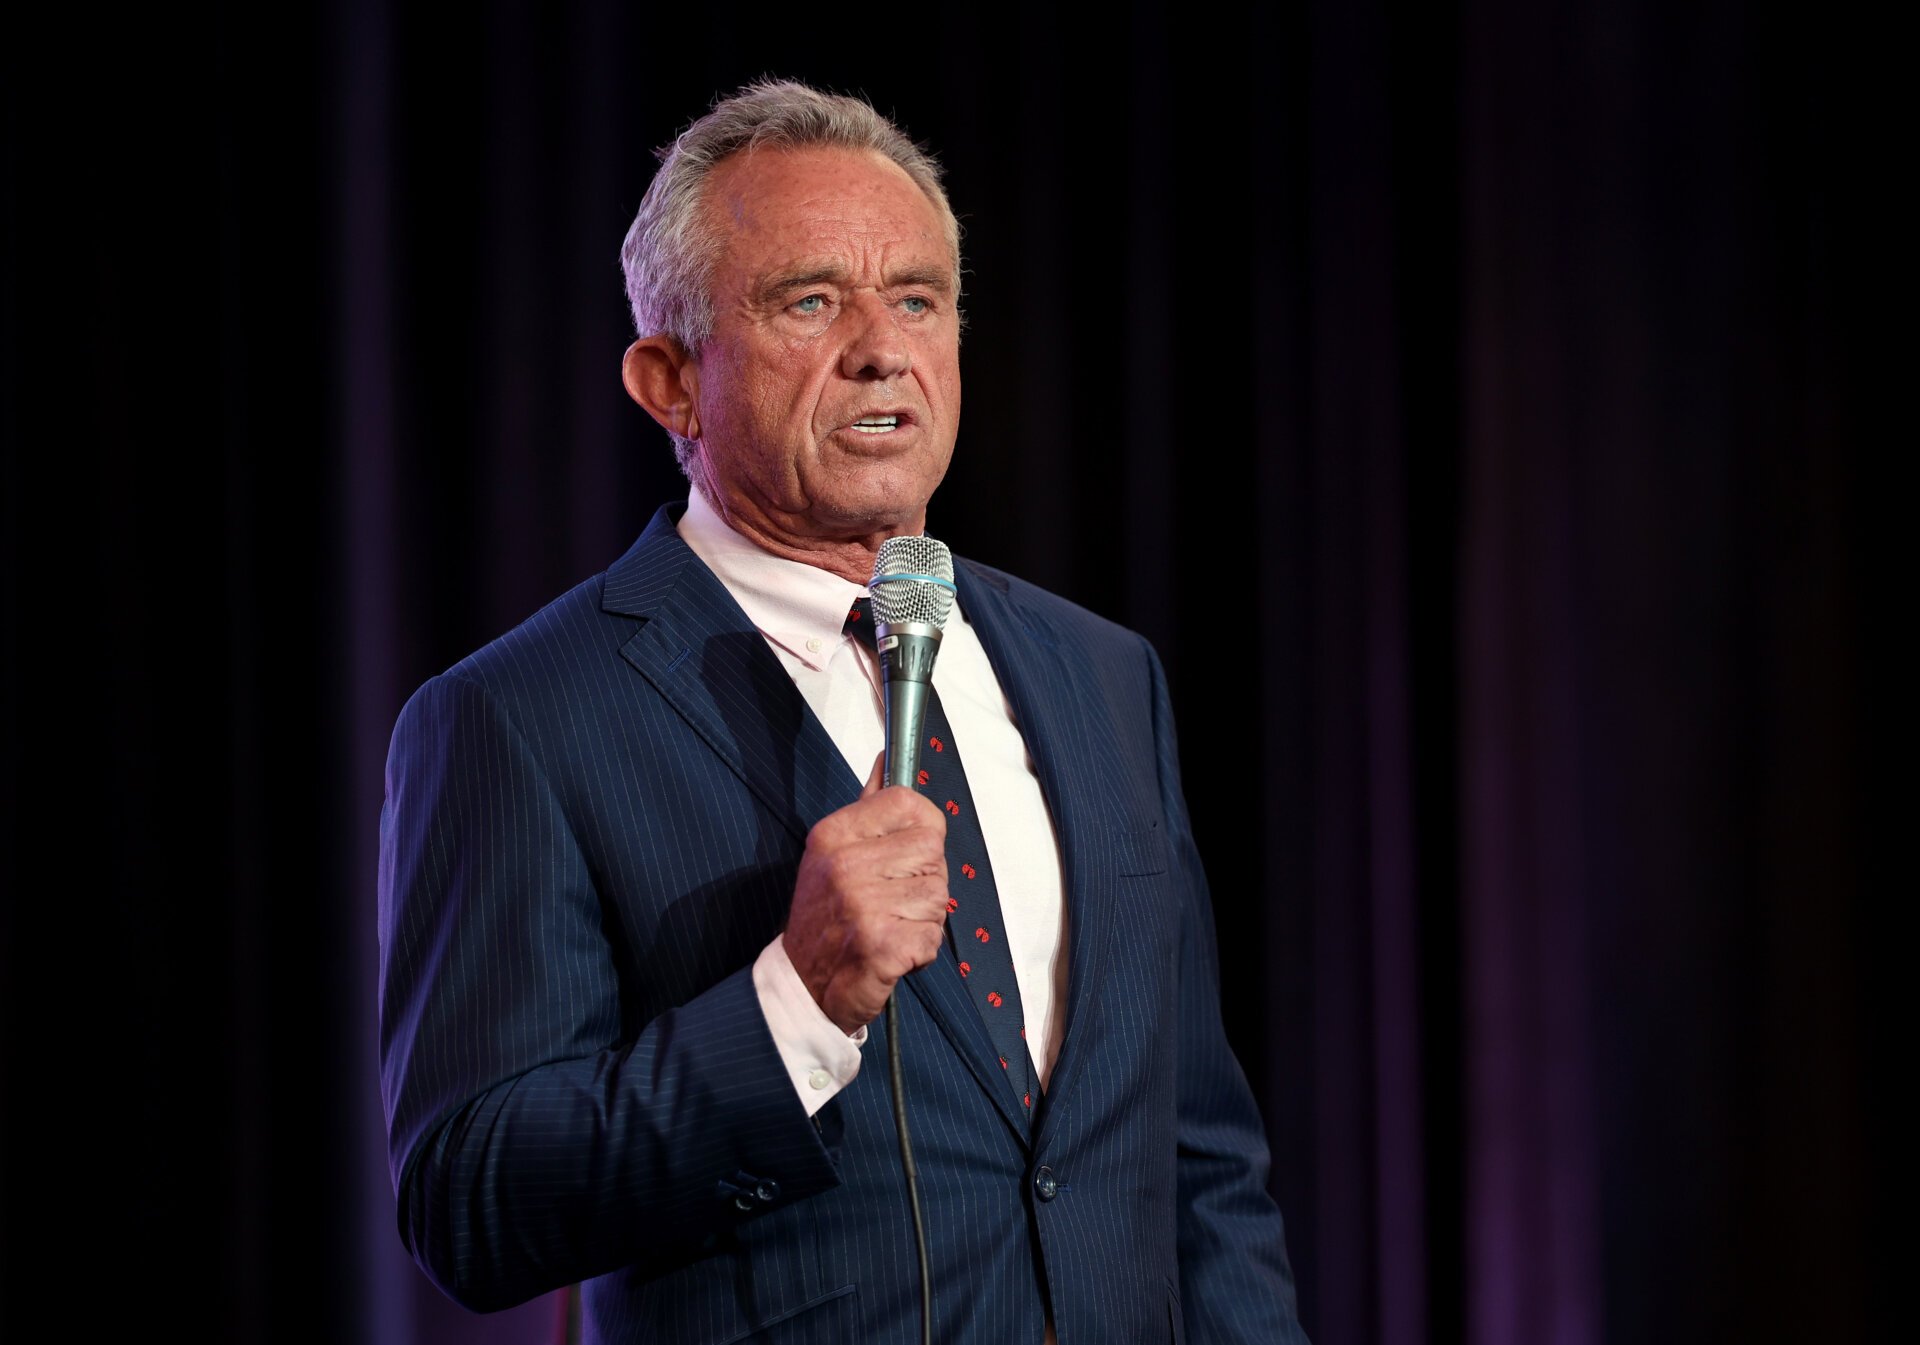 RFK Jr. Says ‘I Won’t Take Sides on 9/11’ in Bizarre Nod to Conspiracy Theorists